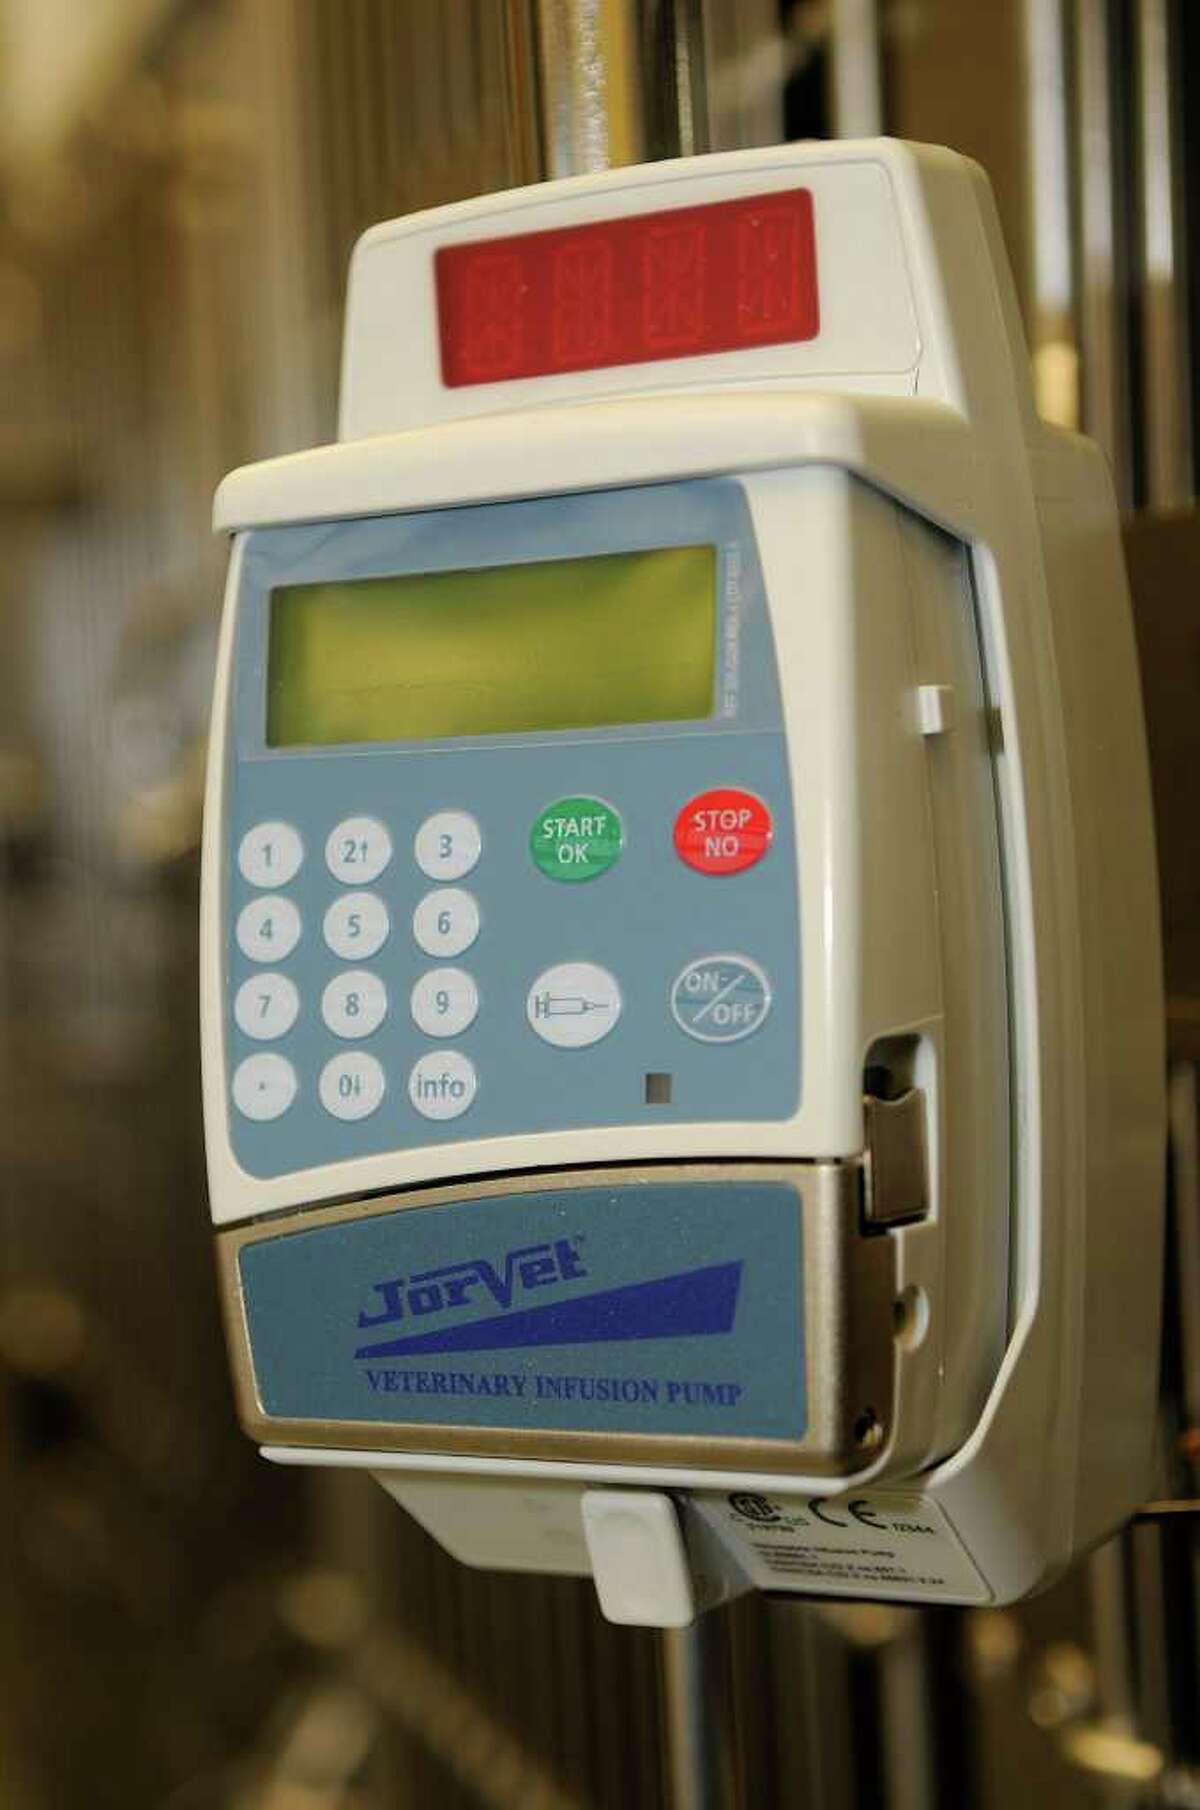 An IV infusion pump waits, on Tuesday, January 11, 2011, for its first patient in the intensive care department at the new Cornell University Veterinary Specialists facility, which will offer 24-hour emergency and critical veterinary care at 880 Canal Street in Stamford, CT. The facility plans to open on Friday.